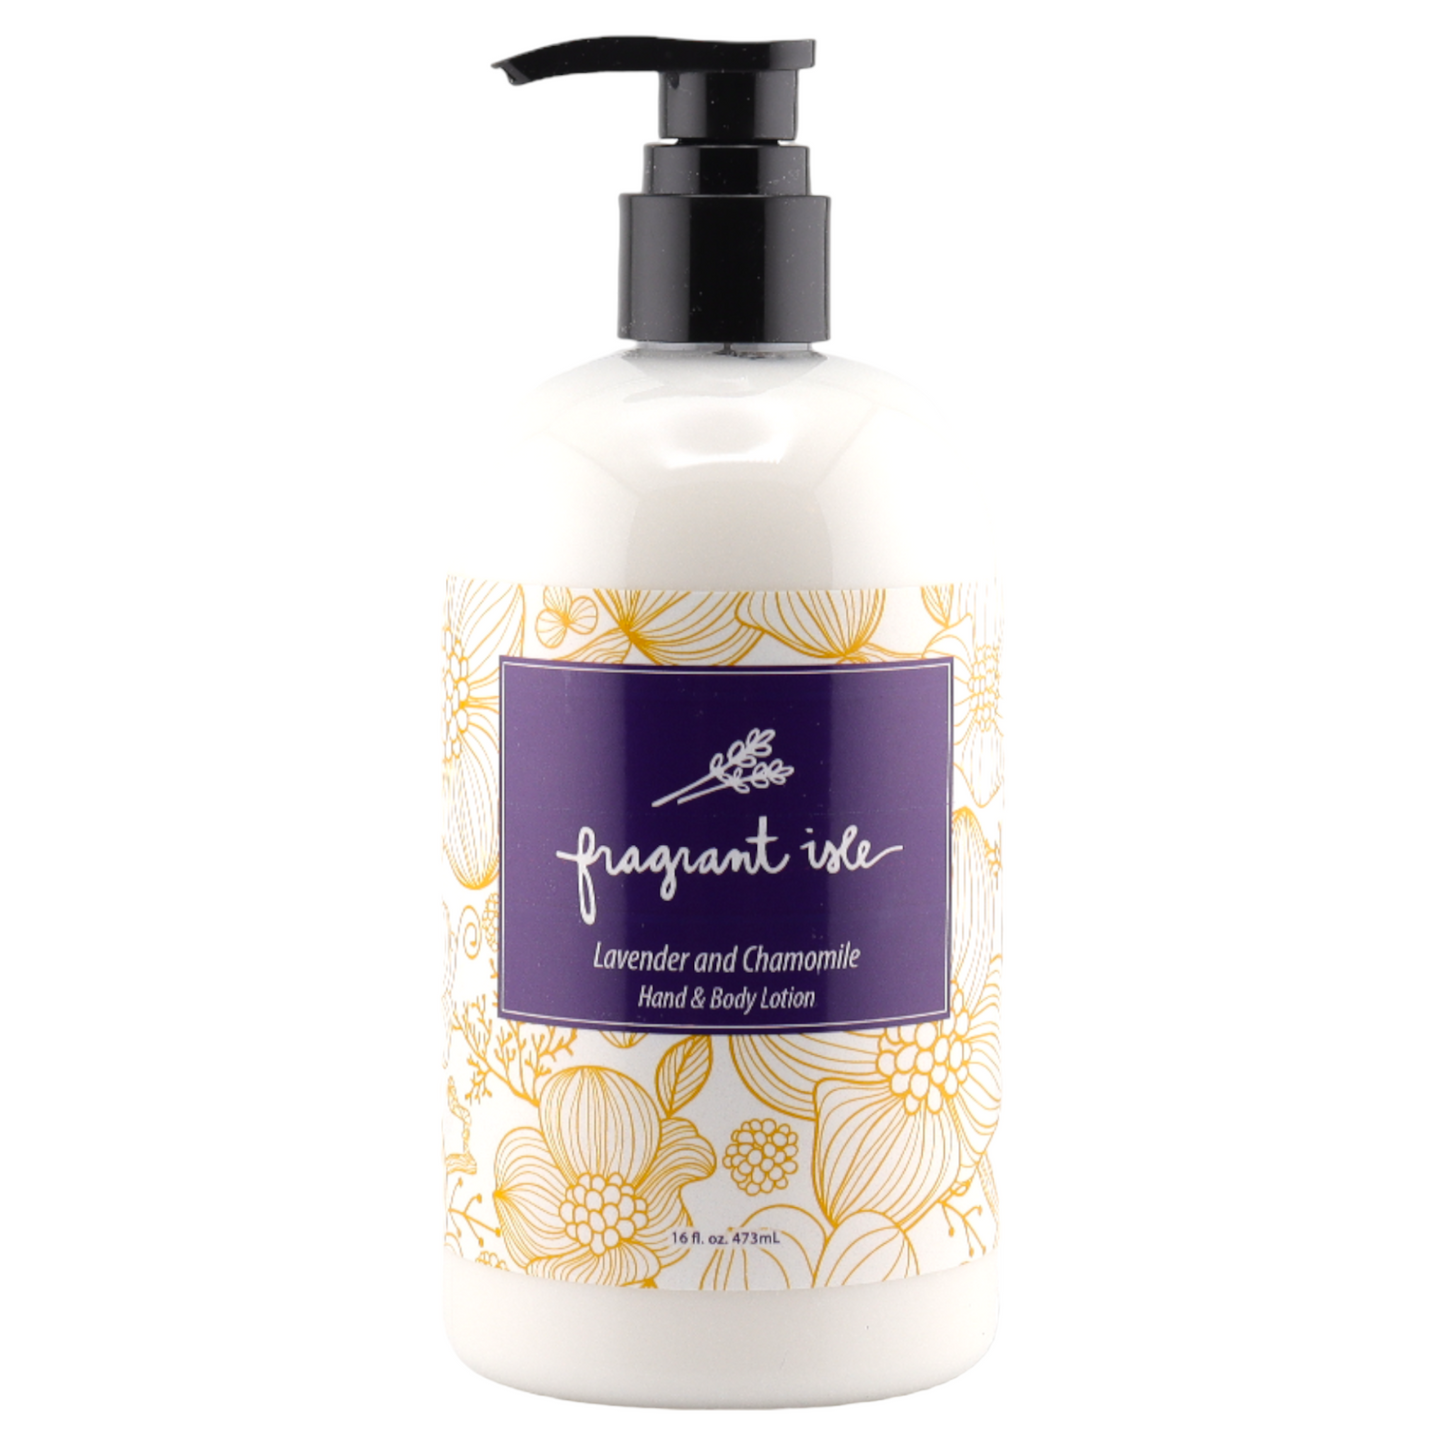 Lavender and Chamomile Hand & Body Lotion - 16 oz